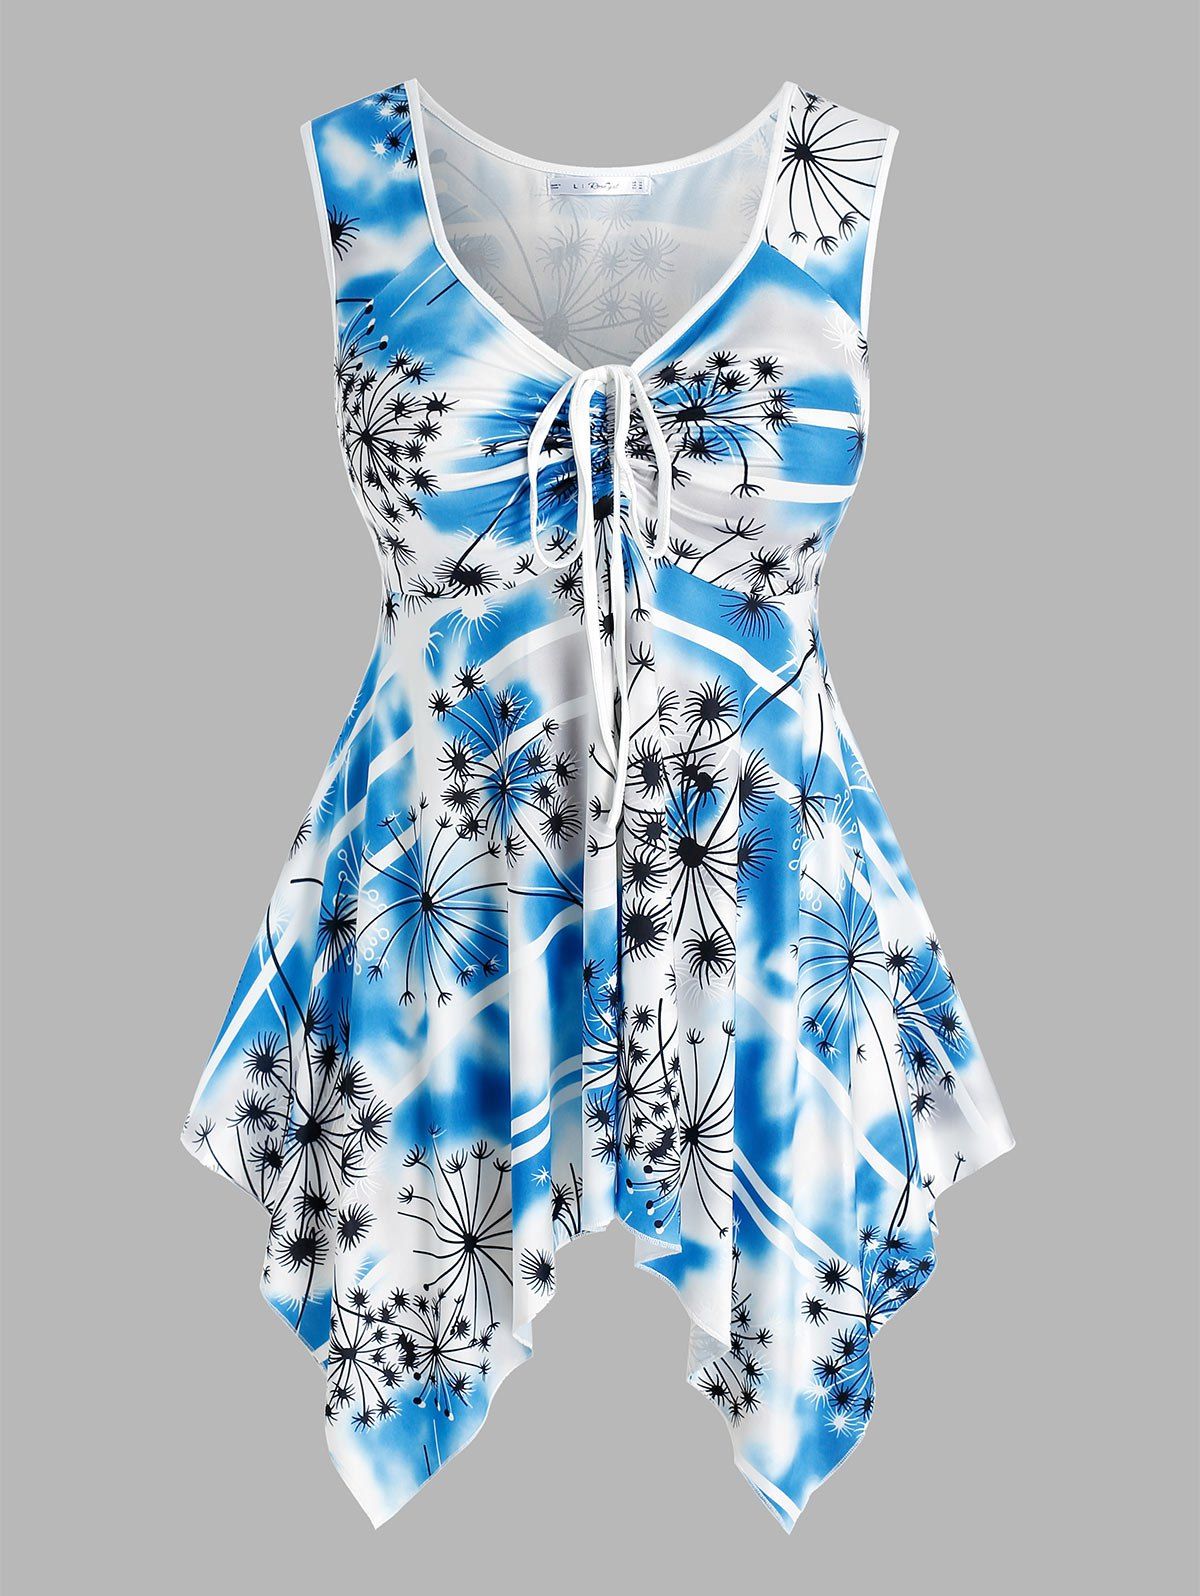 Plus Size Printed Cinched Handkerchief Tank Top - LIGHT BLUE 4X